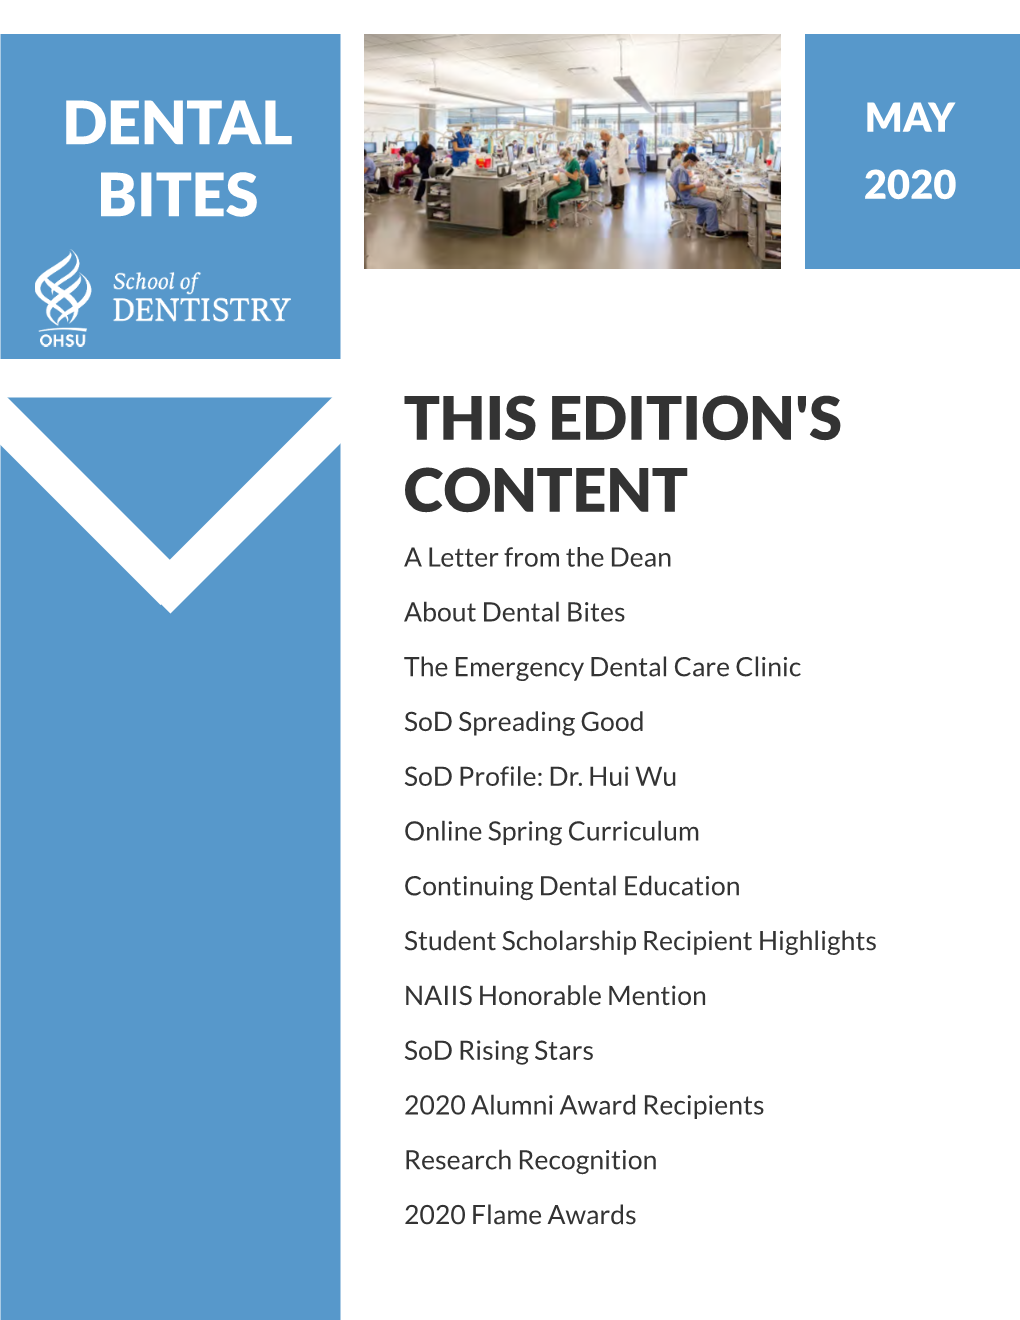 Dental Bites This Edition's Content